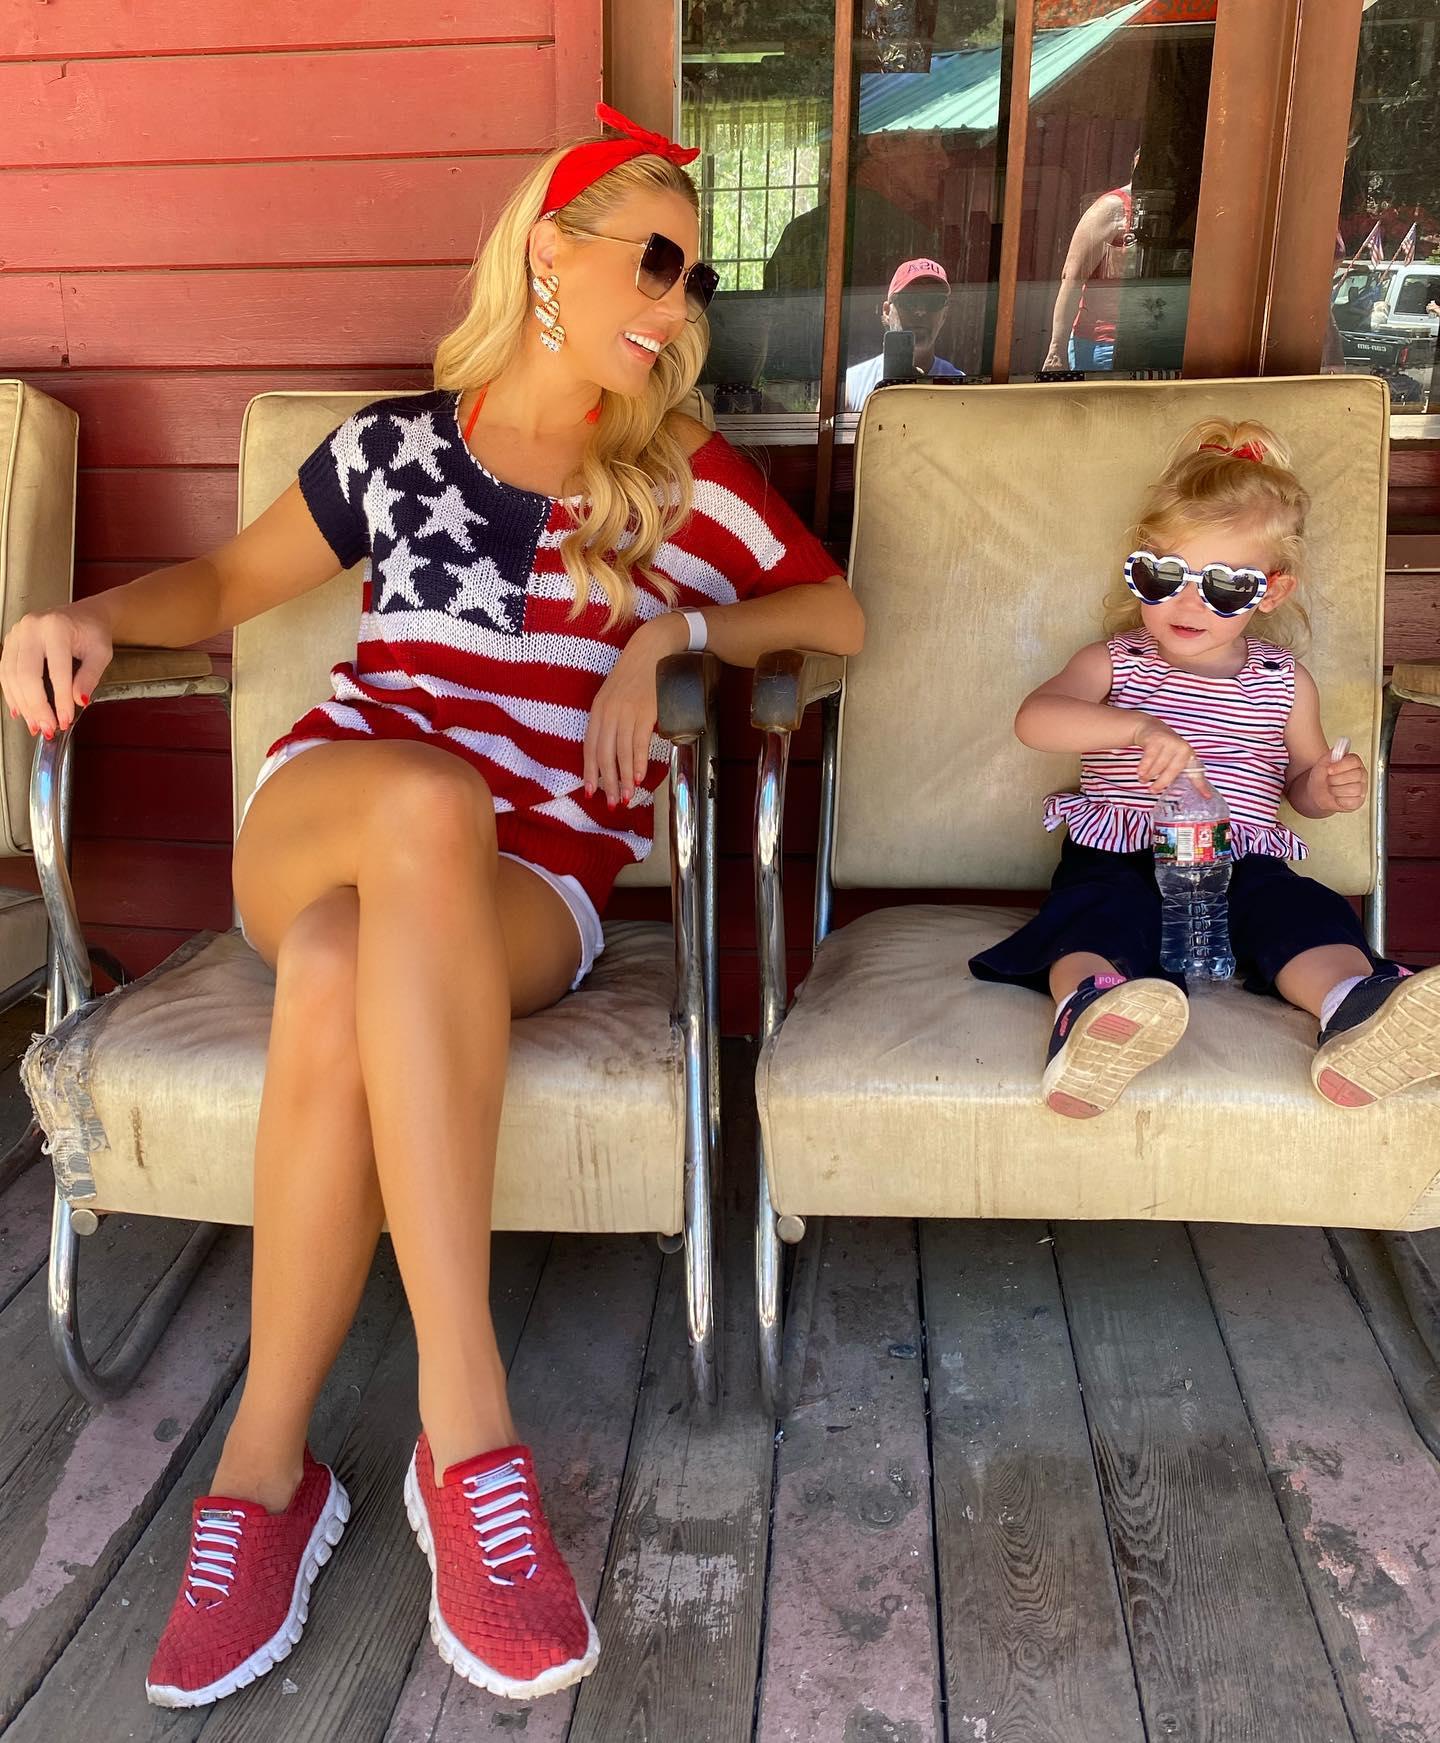 Gretchen Rossi on the Fourth of July with daughter